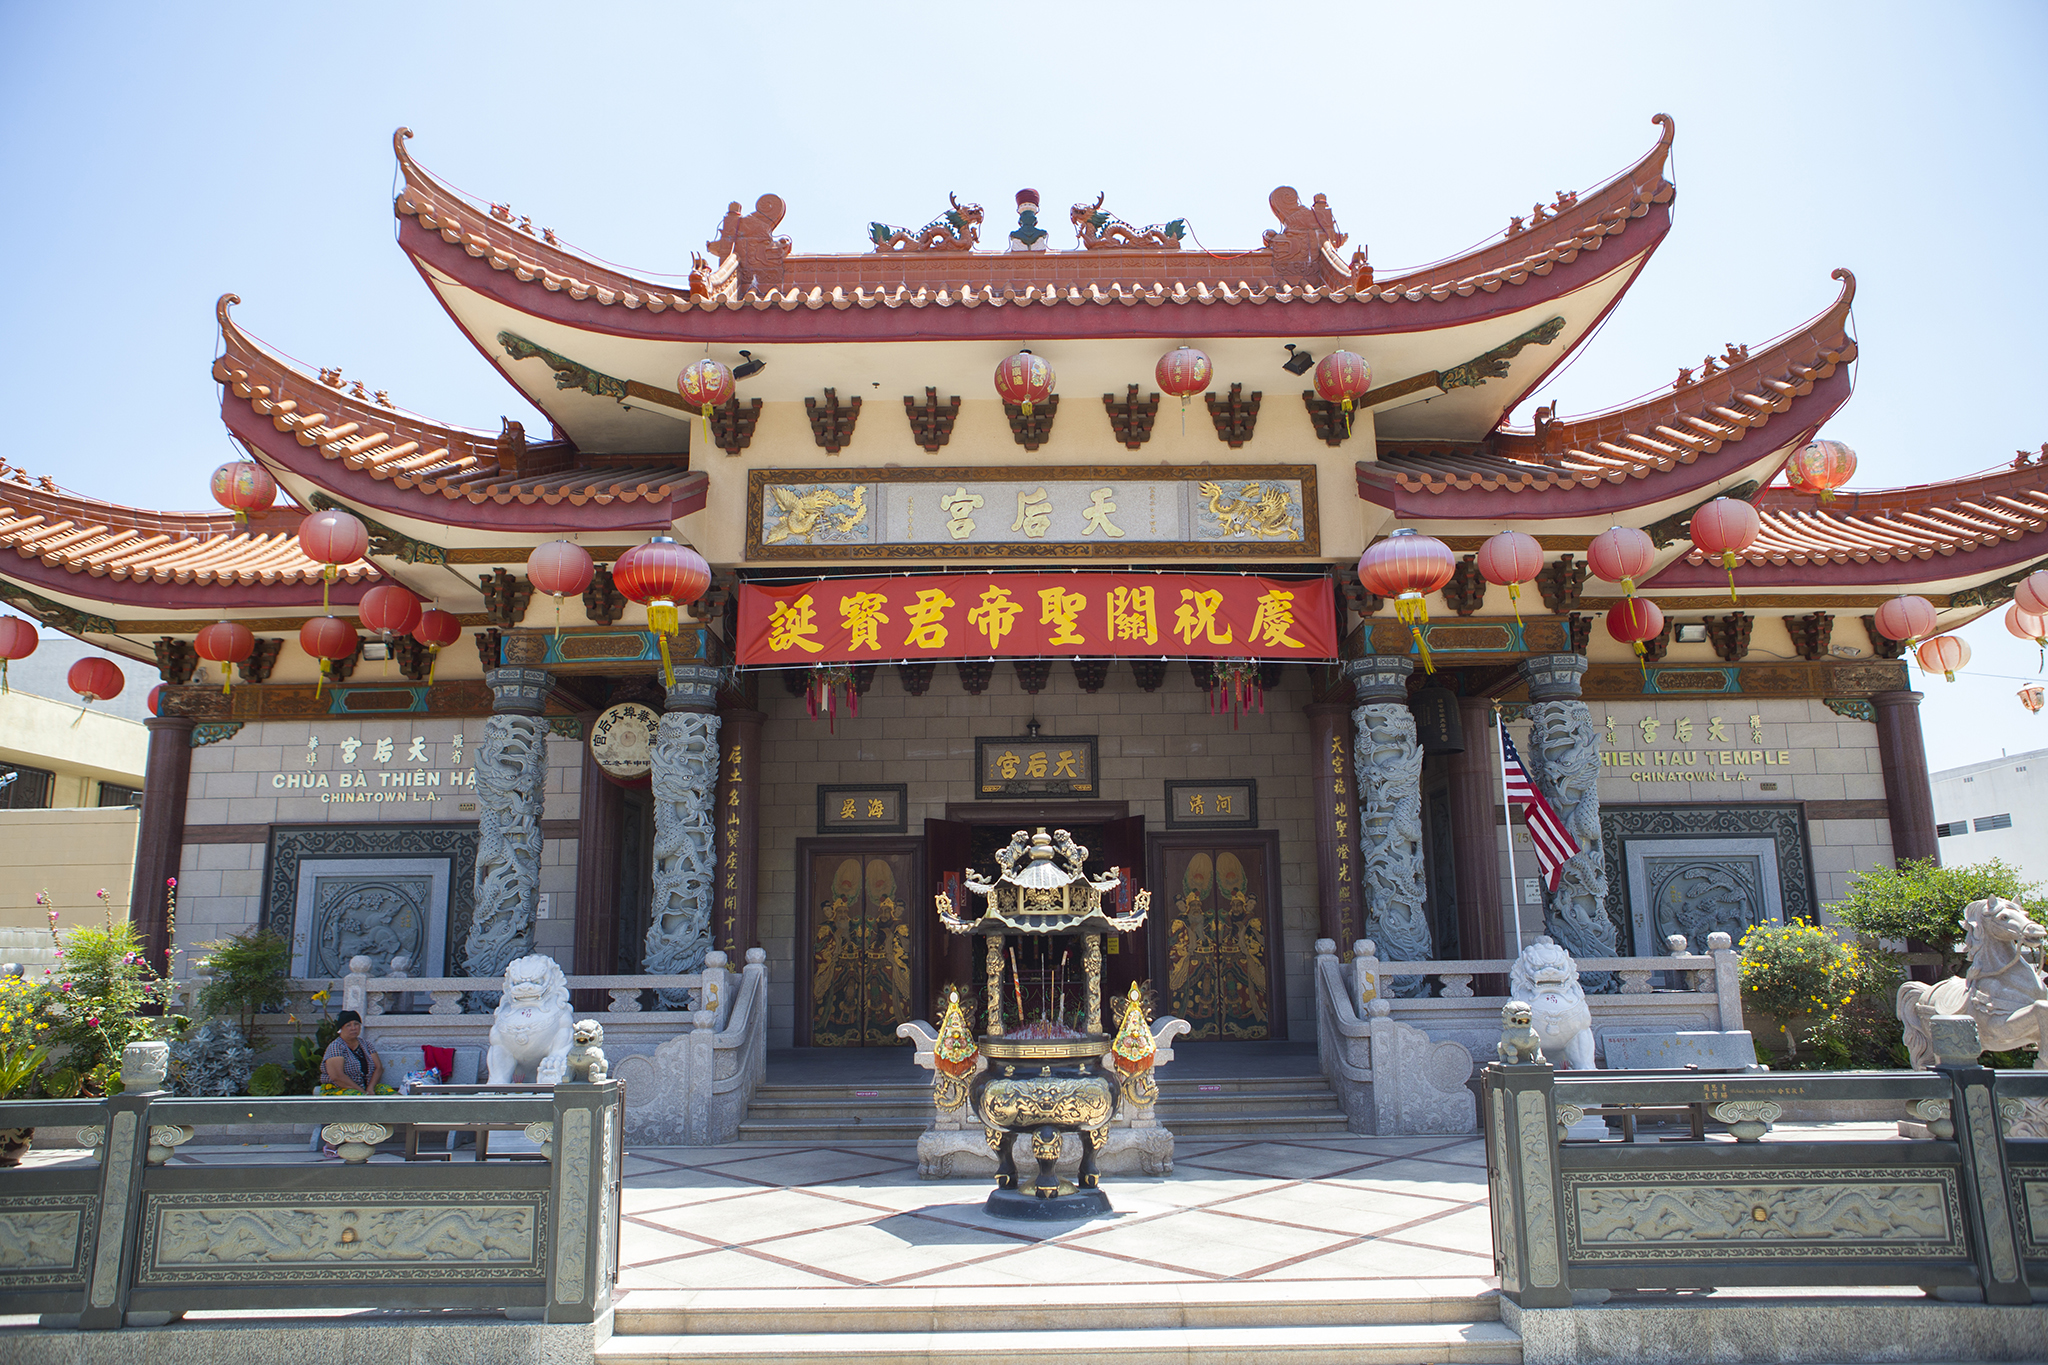 Chinatown in Los Angeles, from dim sum to walking tours